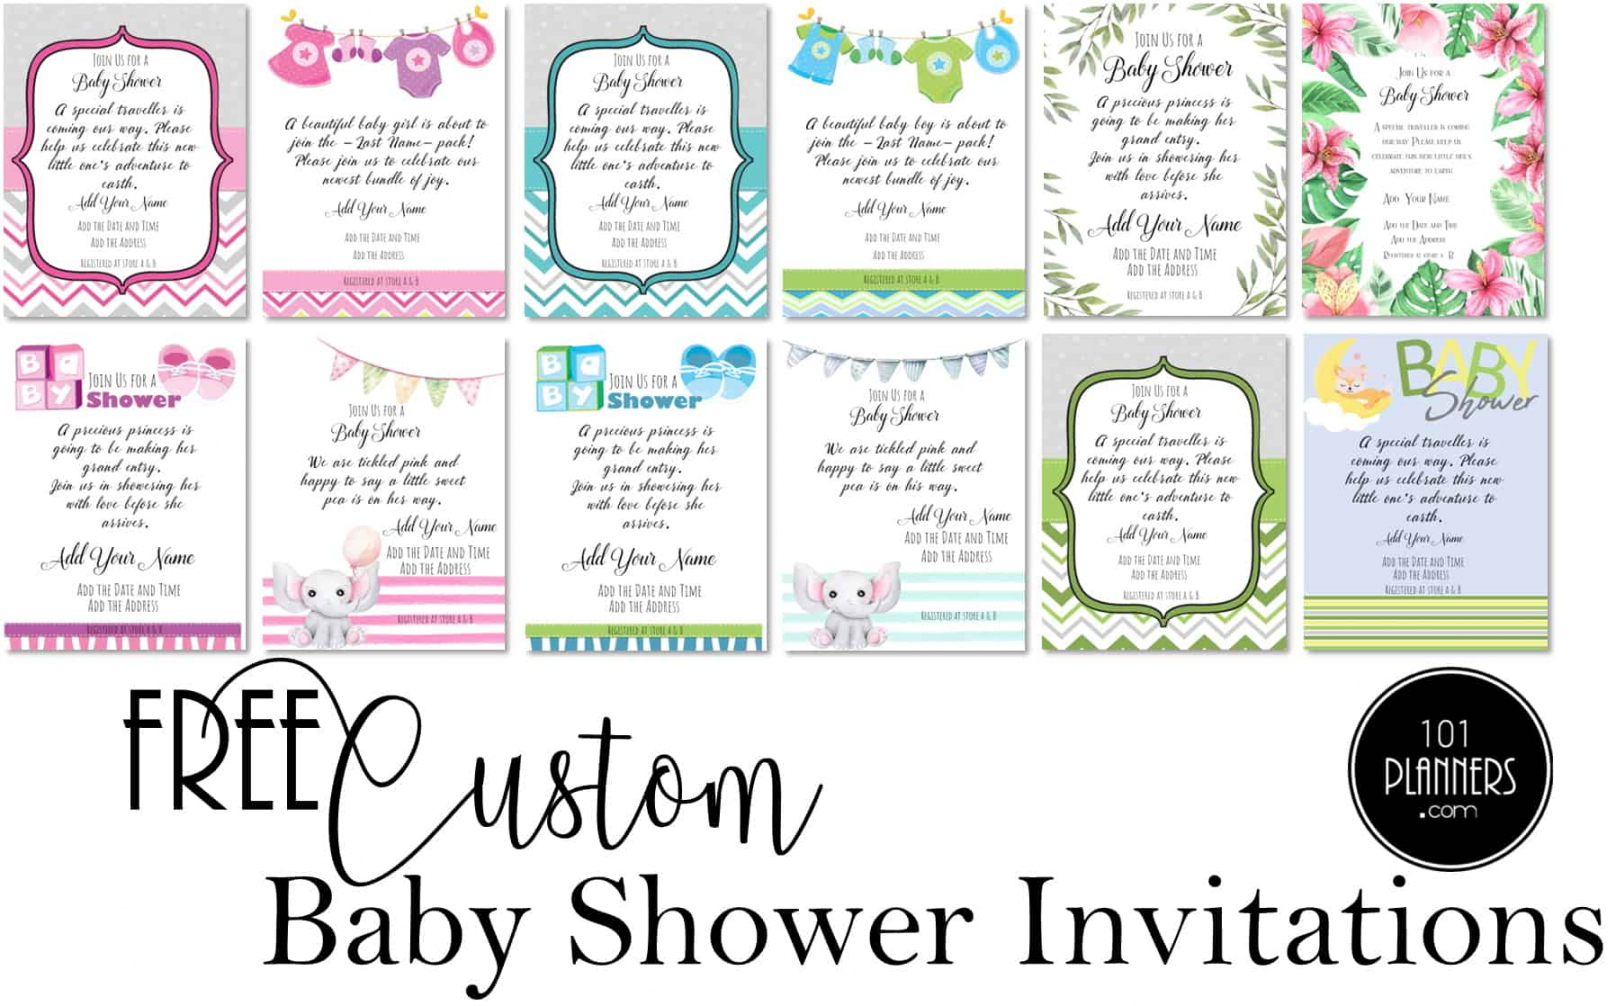 FREE Baby Shower Invitations  Customize Online & Print at Home - FREE Printables - Free Printable Baby Shower Invitations